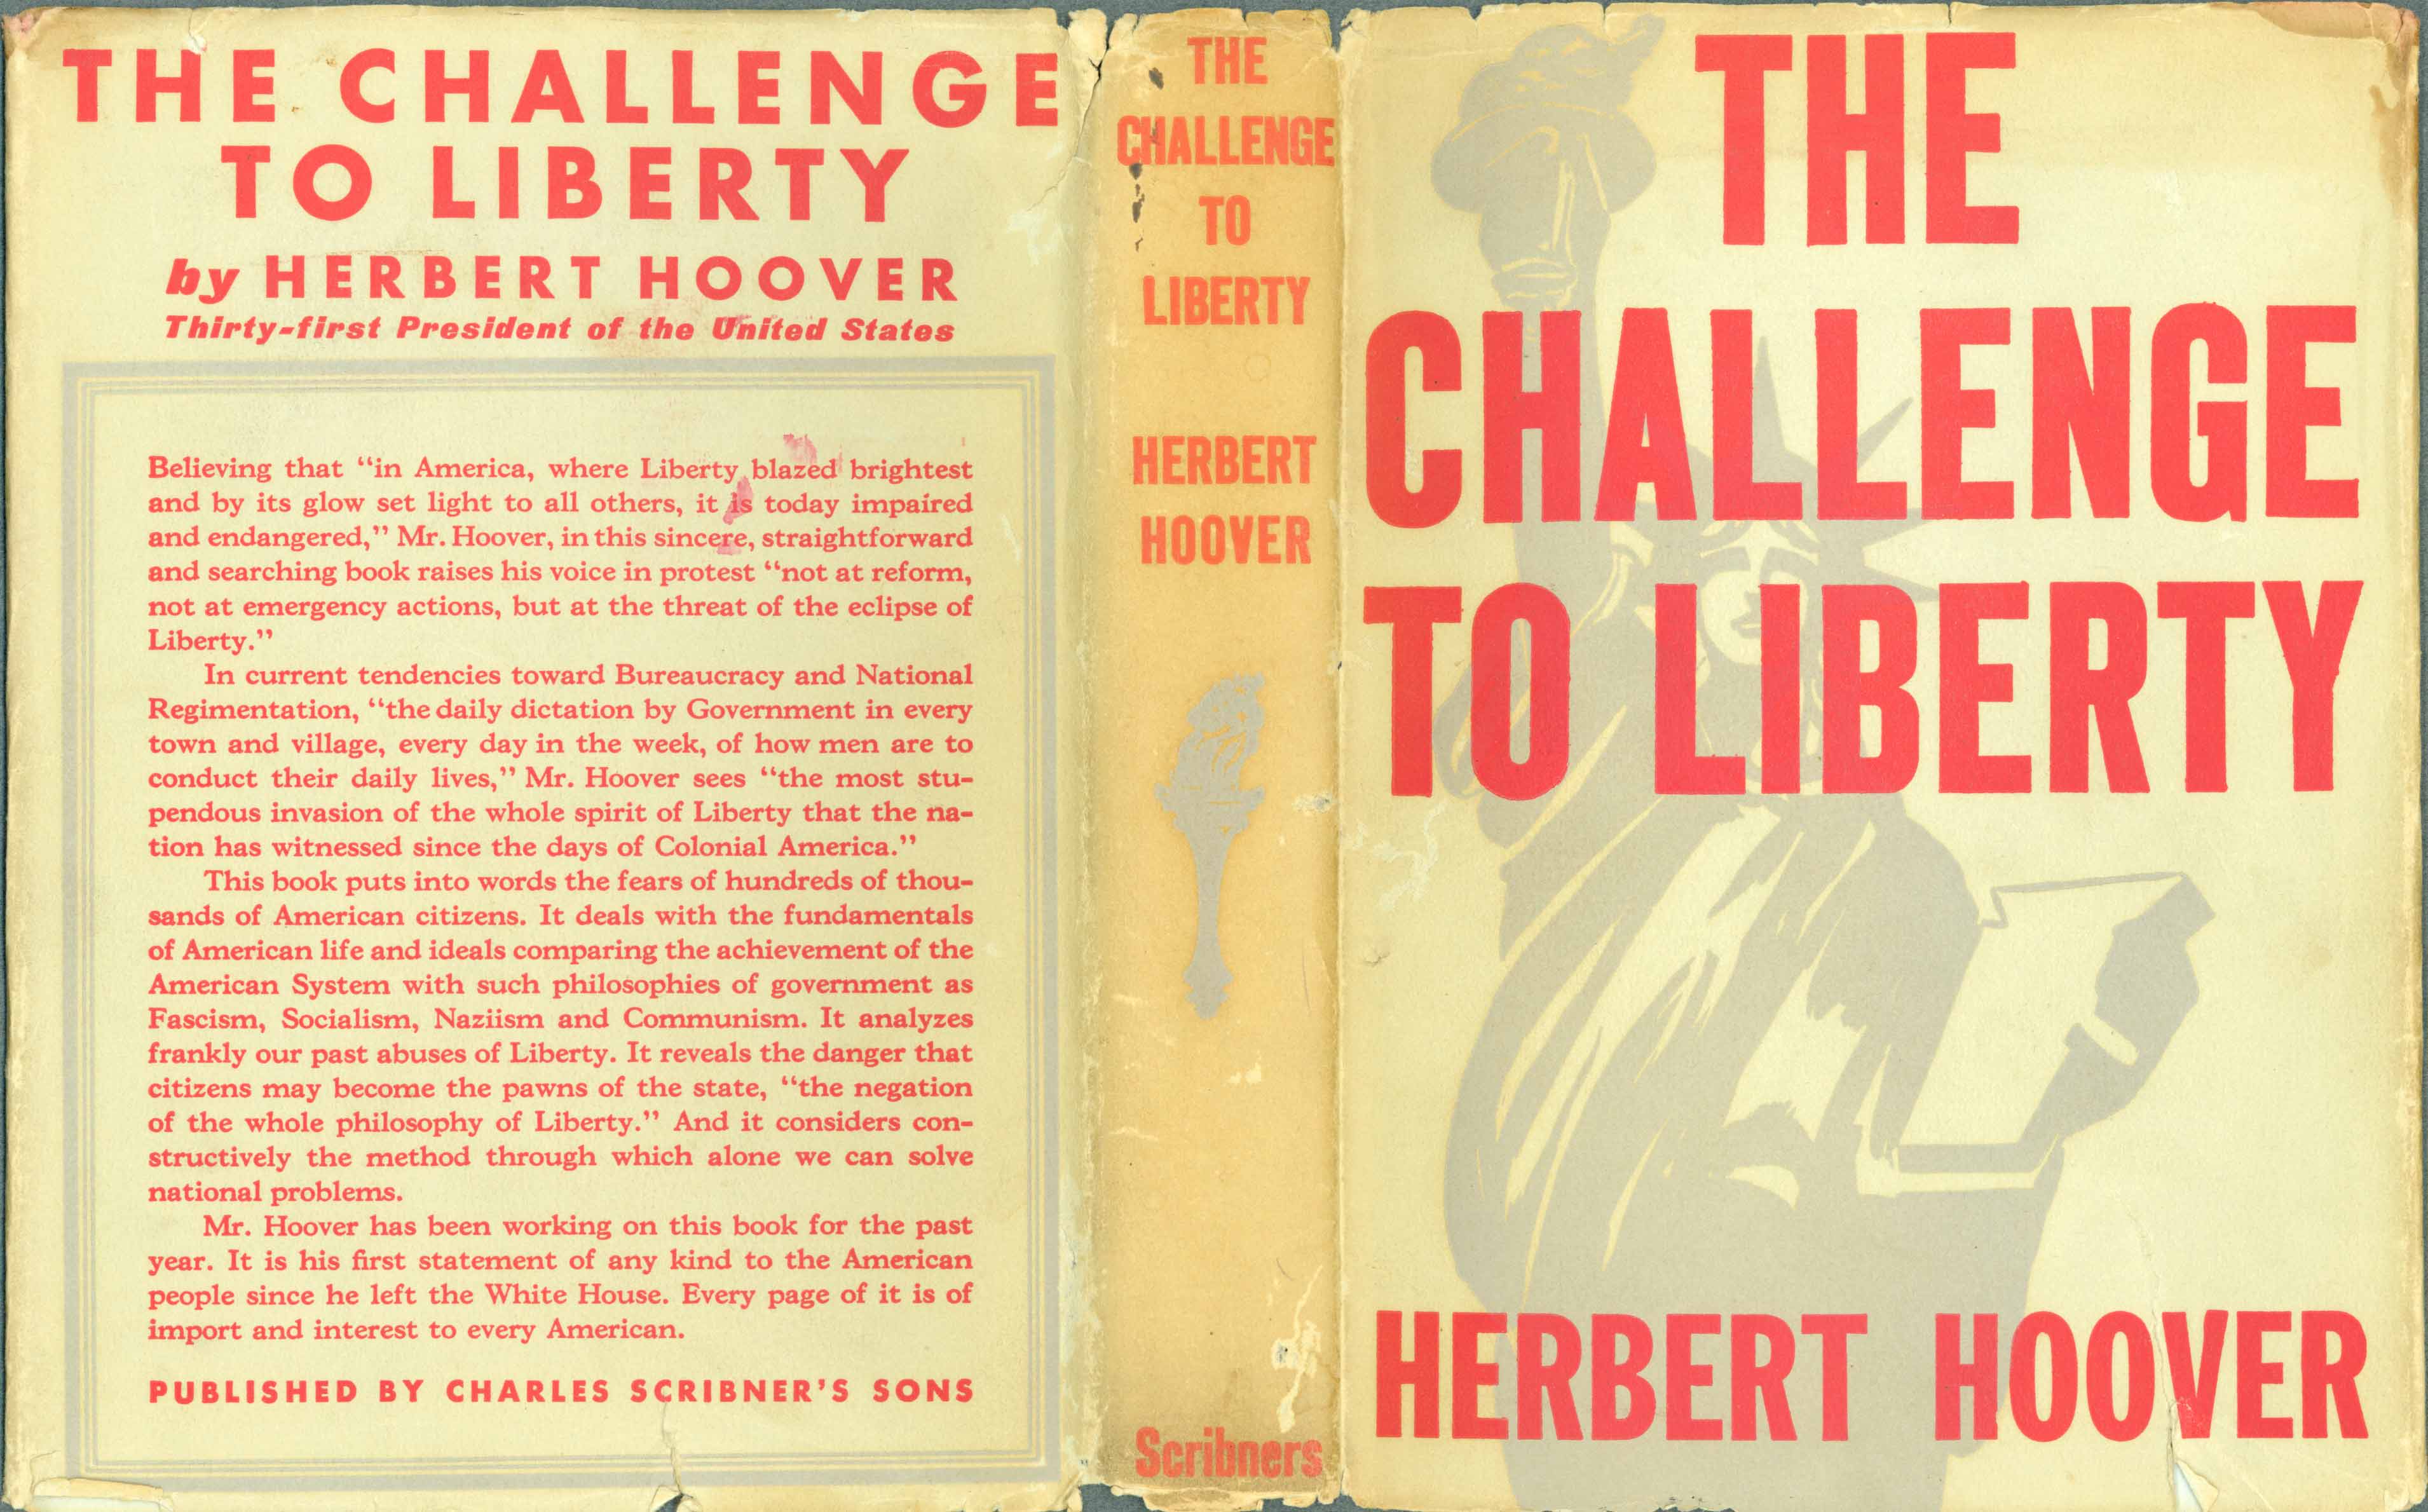 The Challenge to Liberty book cover.